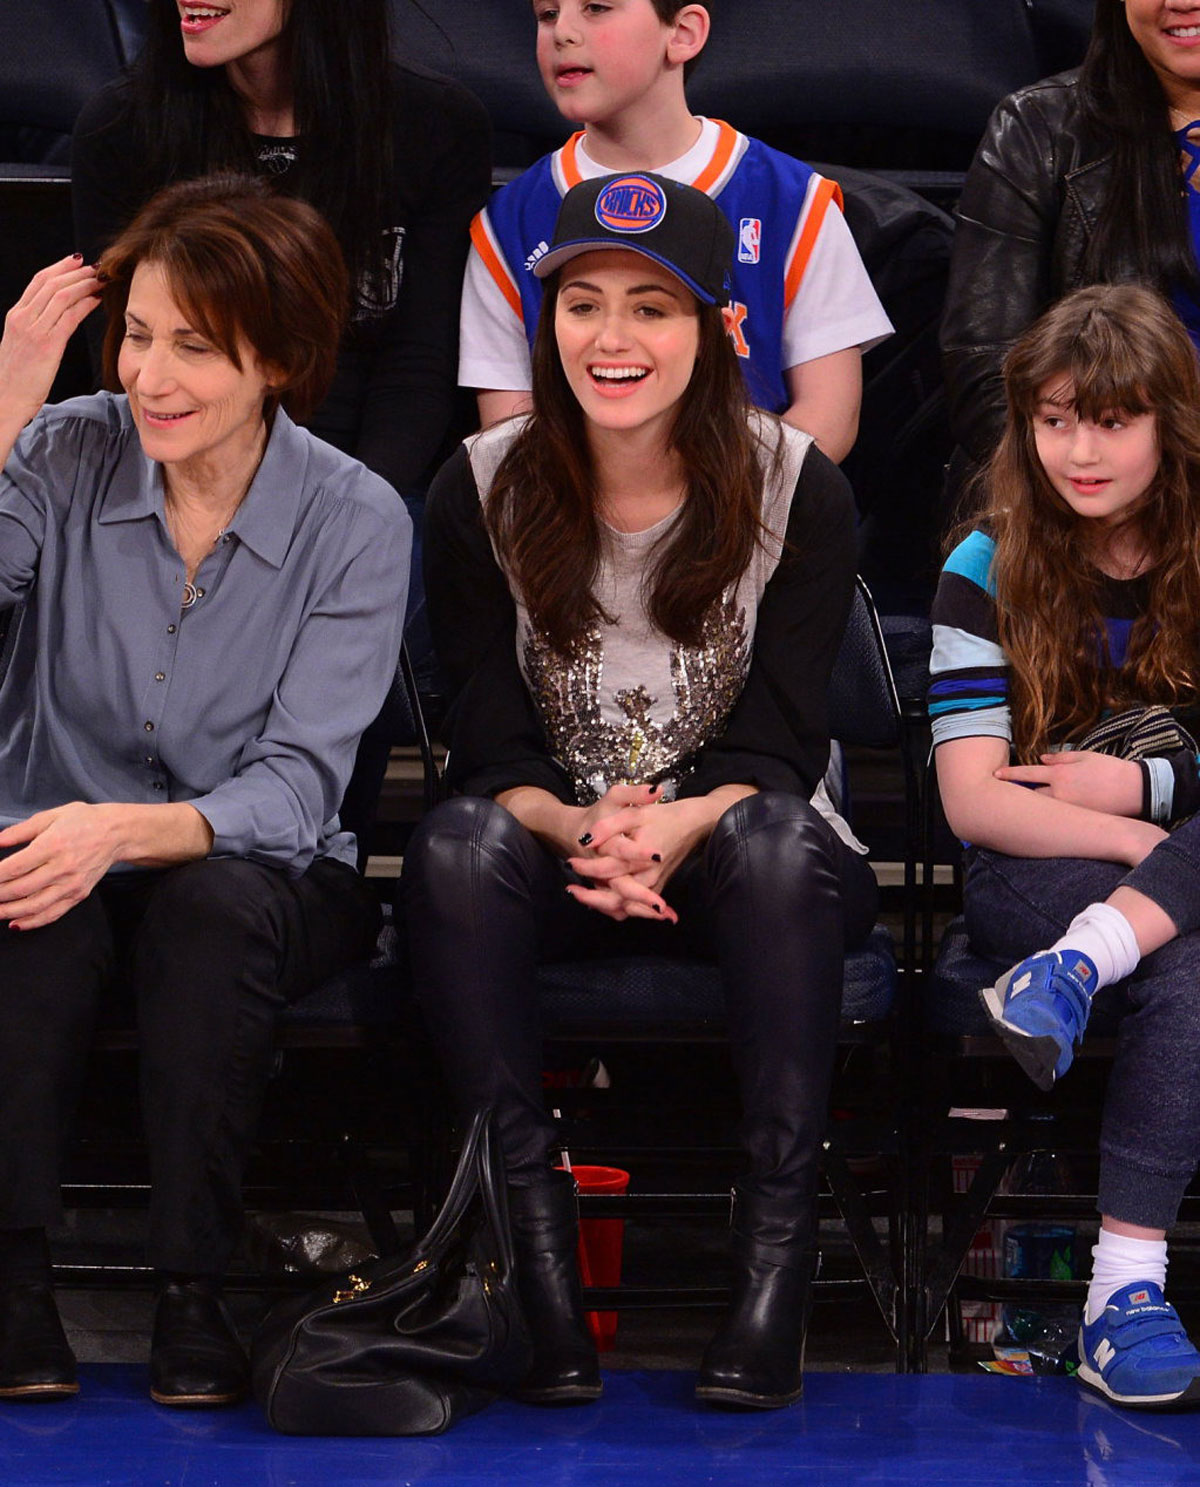 Emmy Rossum attends the Knicks Game in NY